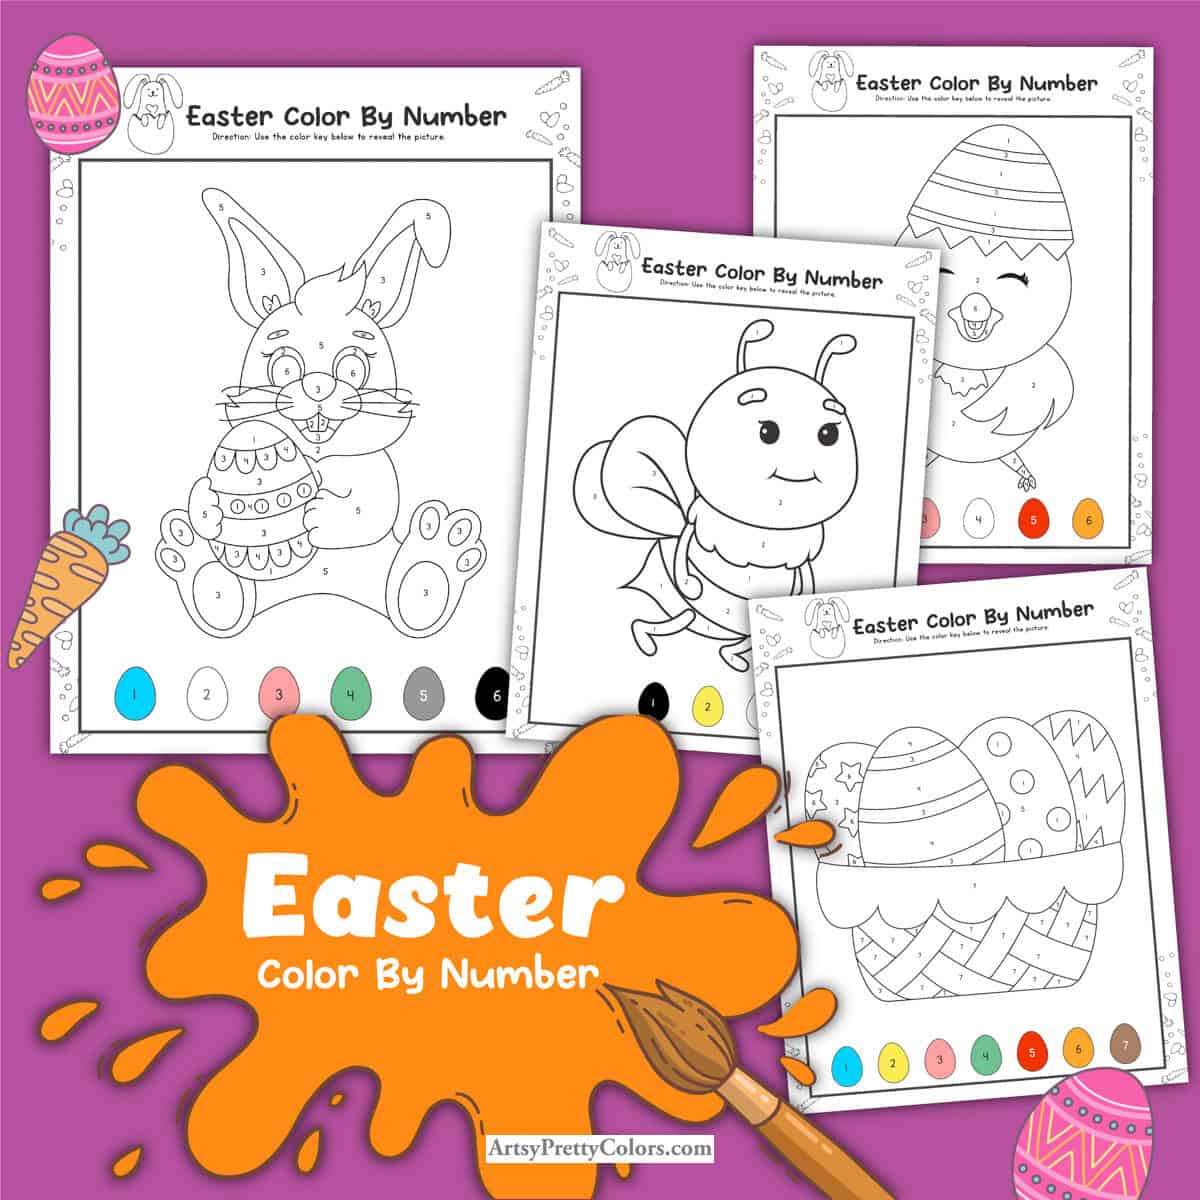 Multiple different pdfs of free Easter color by number sheets- show whole set in one pdf file.